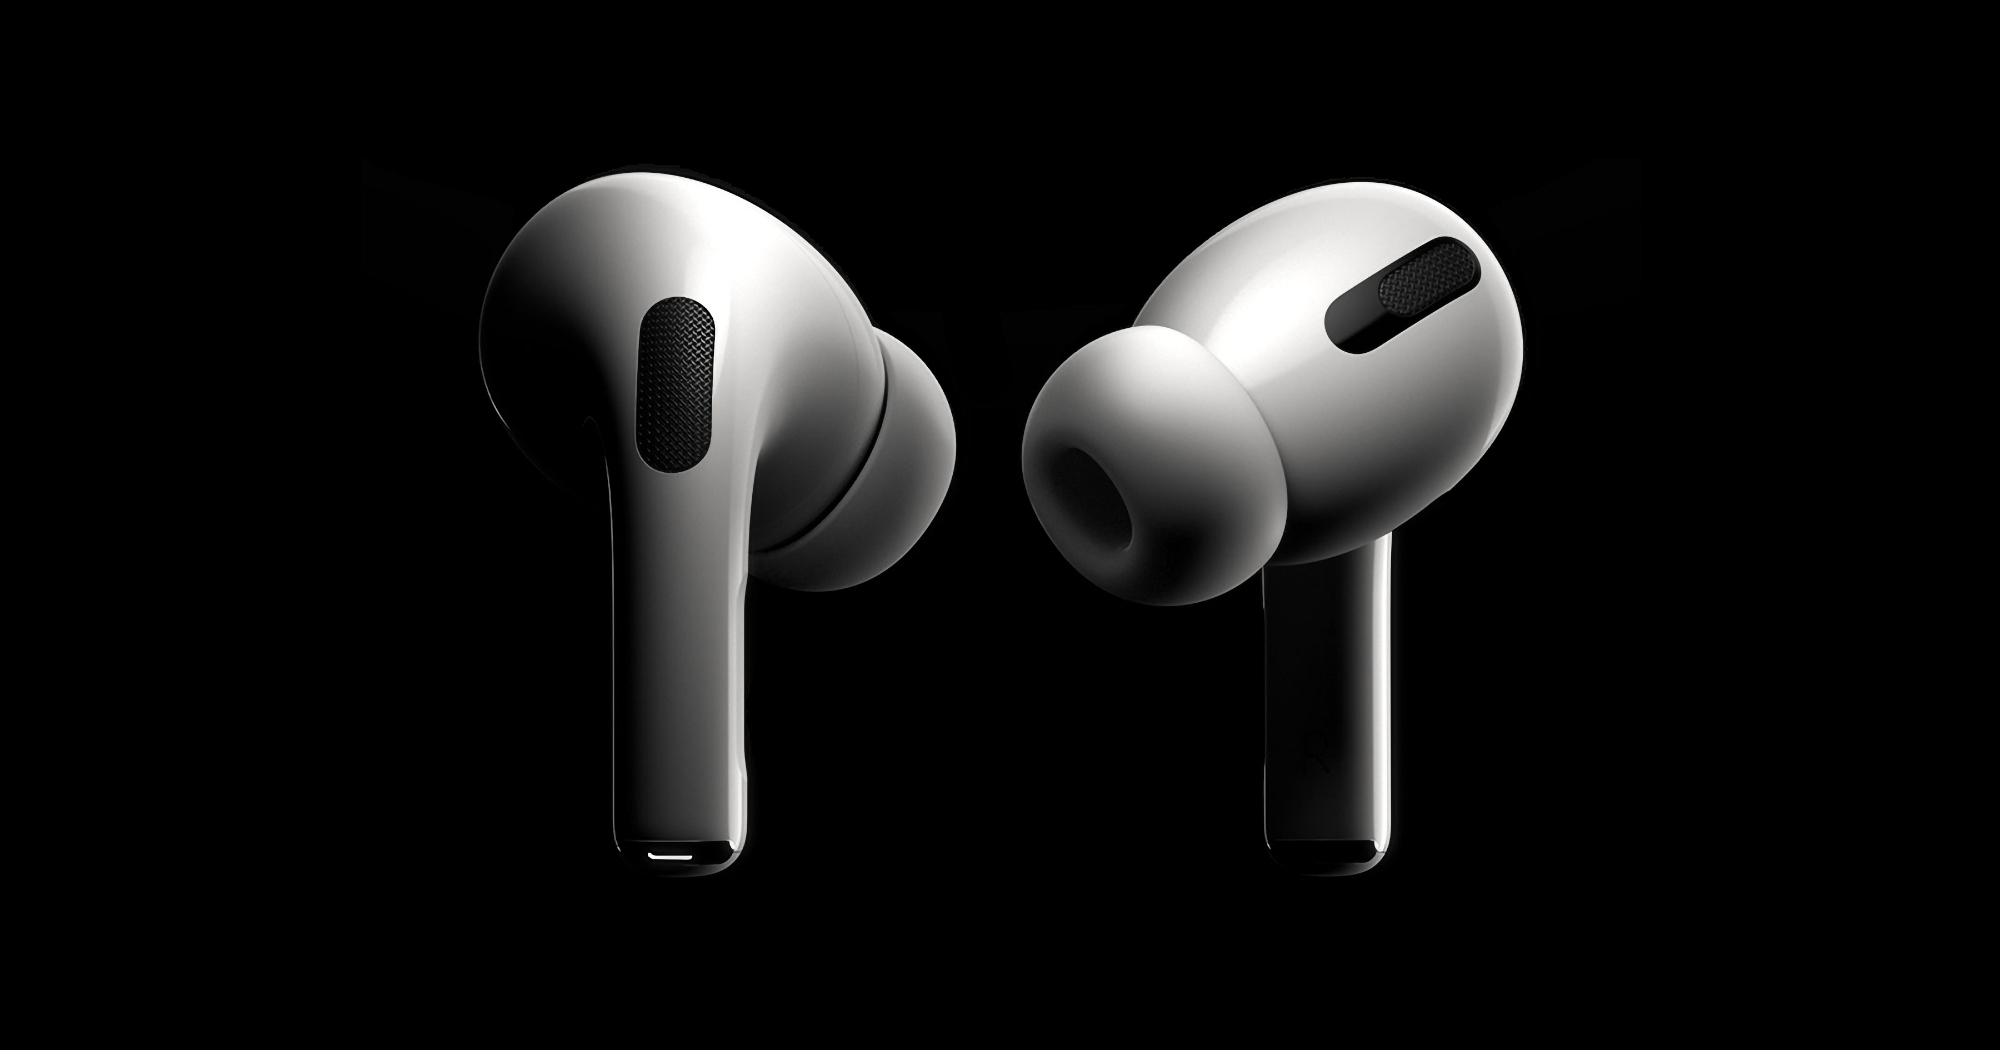 Ming-Chi Kuo: Apple will start releasing AirPods with USB-C in 2023